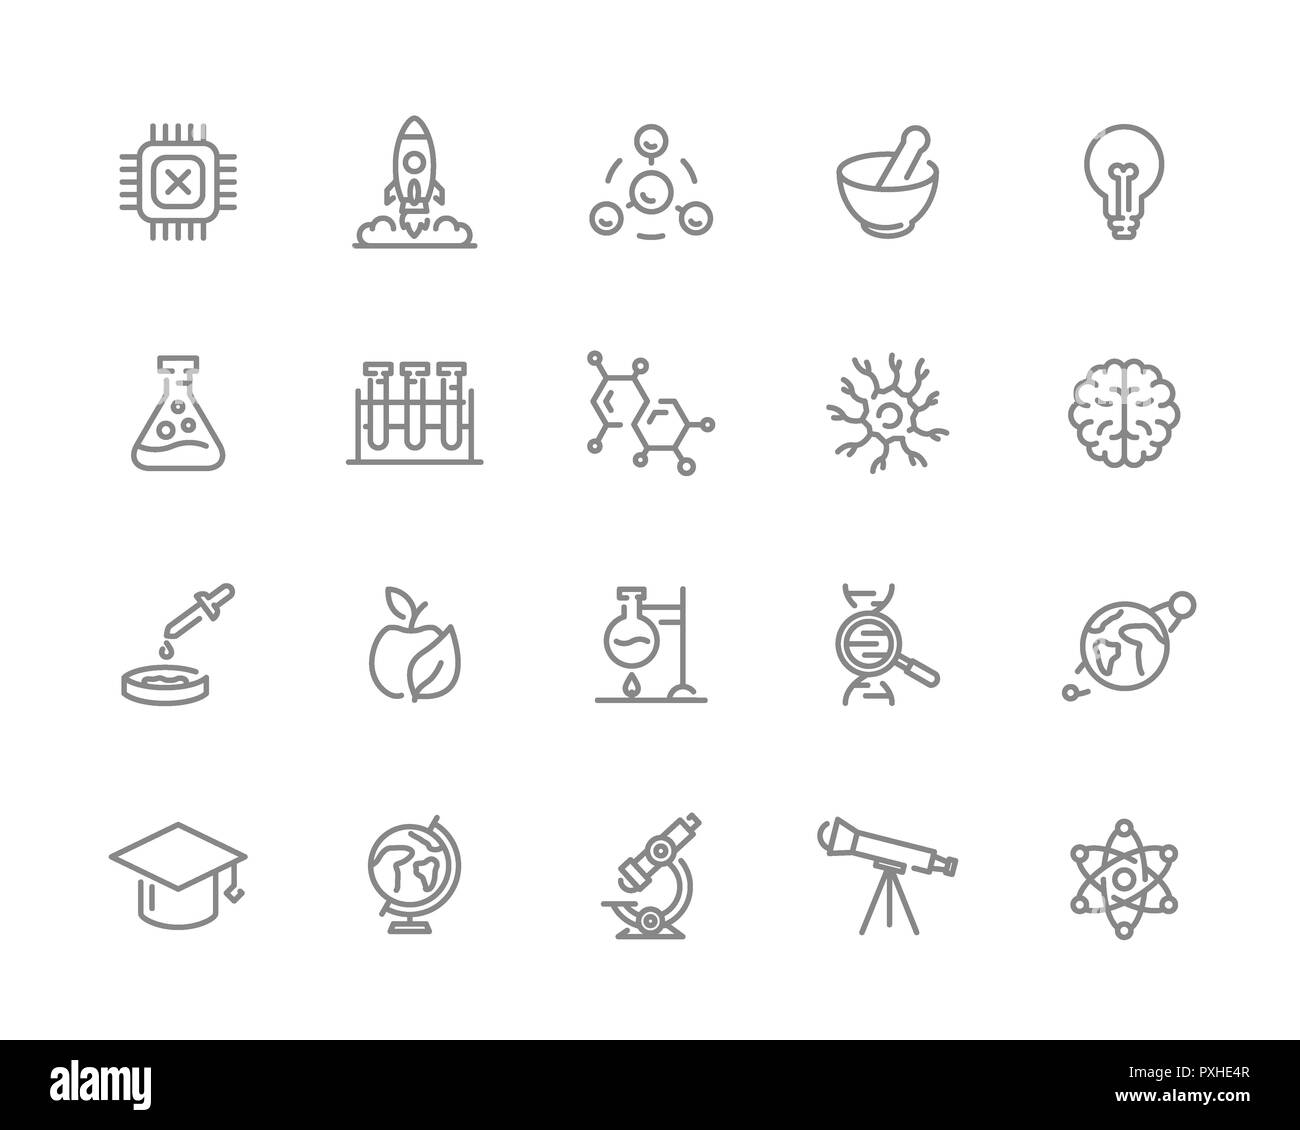 Set of science and research line icons. Chip, rocket, atom, ion, lamp, tube, bulb, neuron, brain, dna, molecule, lab, space, microscope, telescope and more. Stock Photo